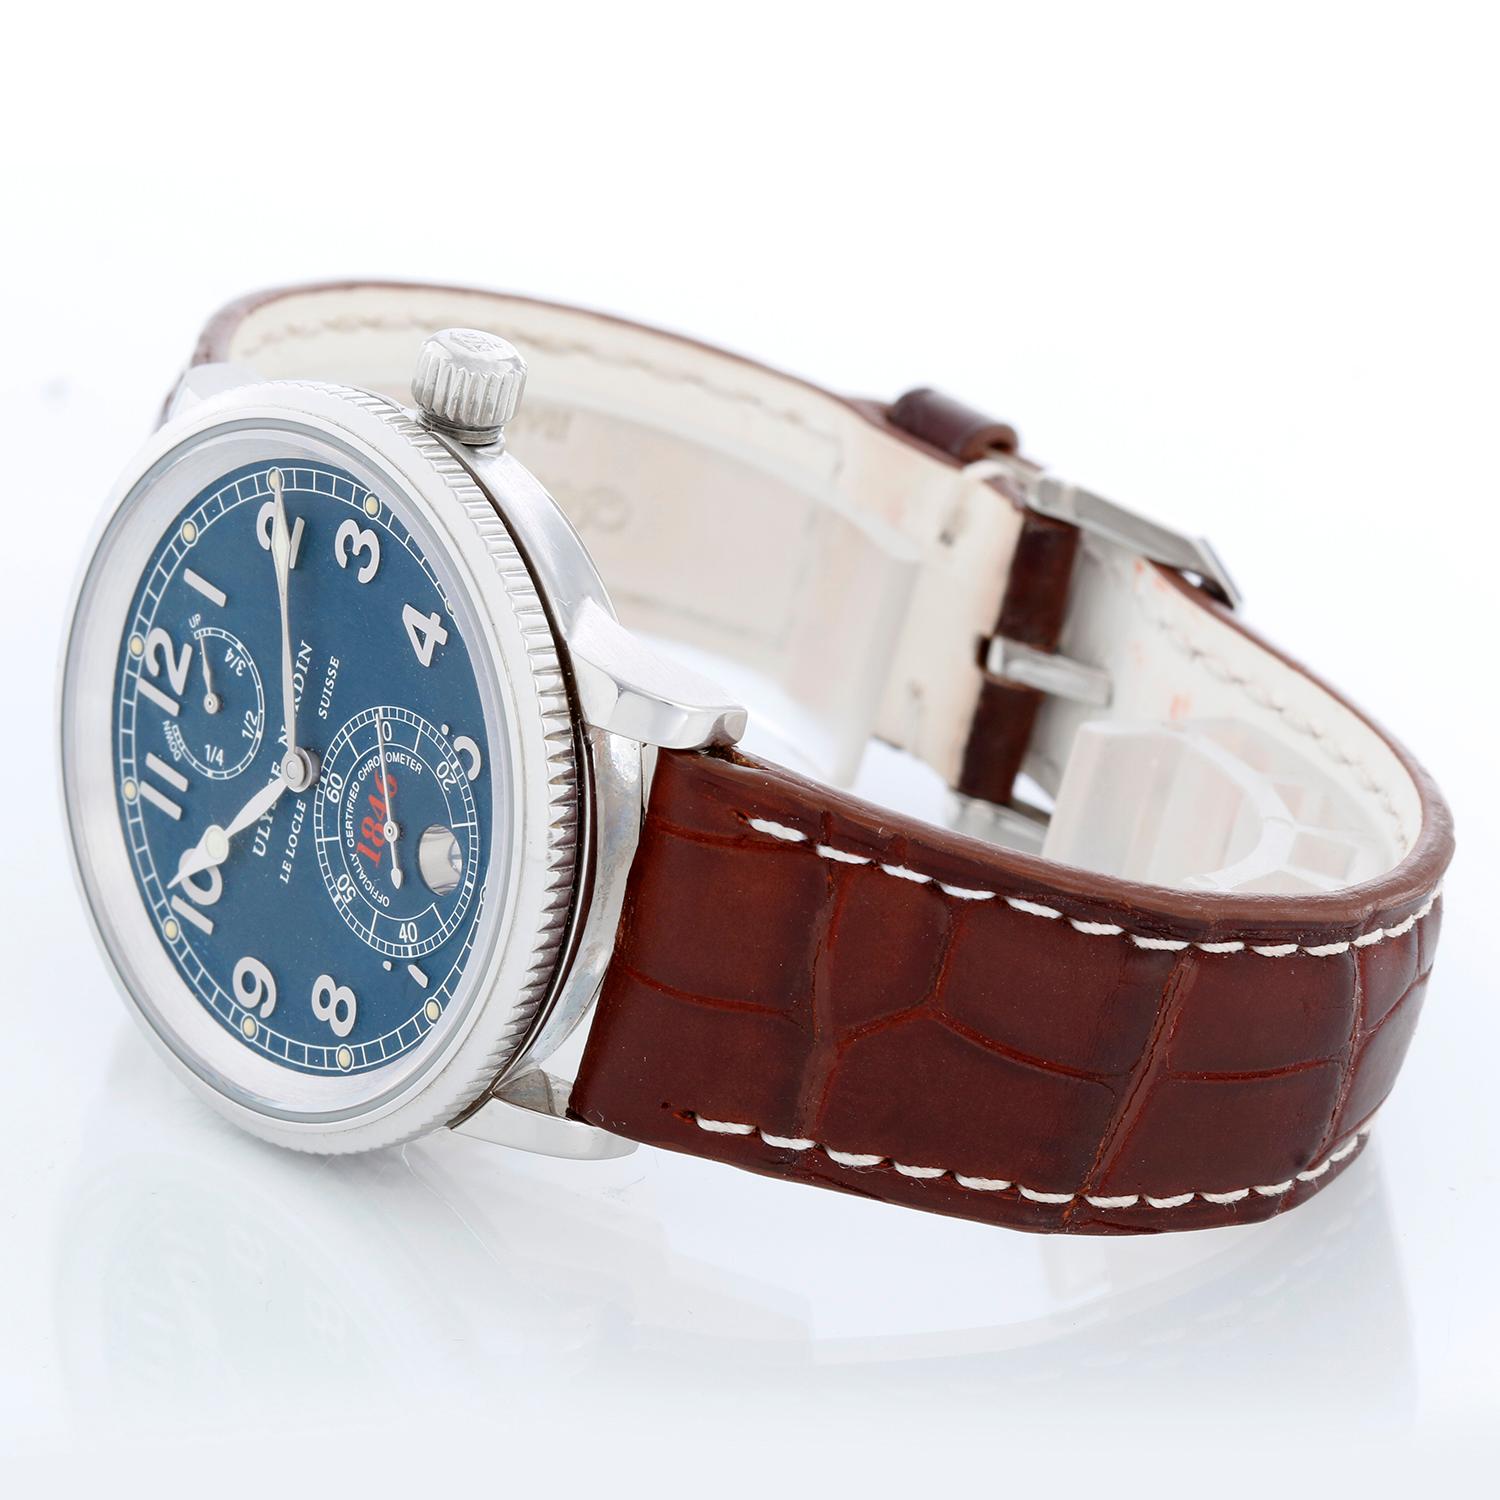 Ulysse Nardin Marine Stainless Steel 1846 Watch  263-22 - Automatic. Stainless Steel  ( 38 mm ). Blue dial with Arabic numerals; sub dial at 12 o'clock and 6 o'clock. Brown leather strap with Nardin buckle. Pre-owned with custom box.